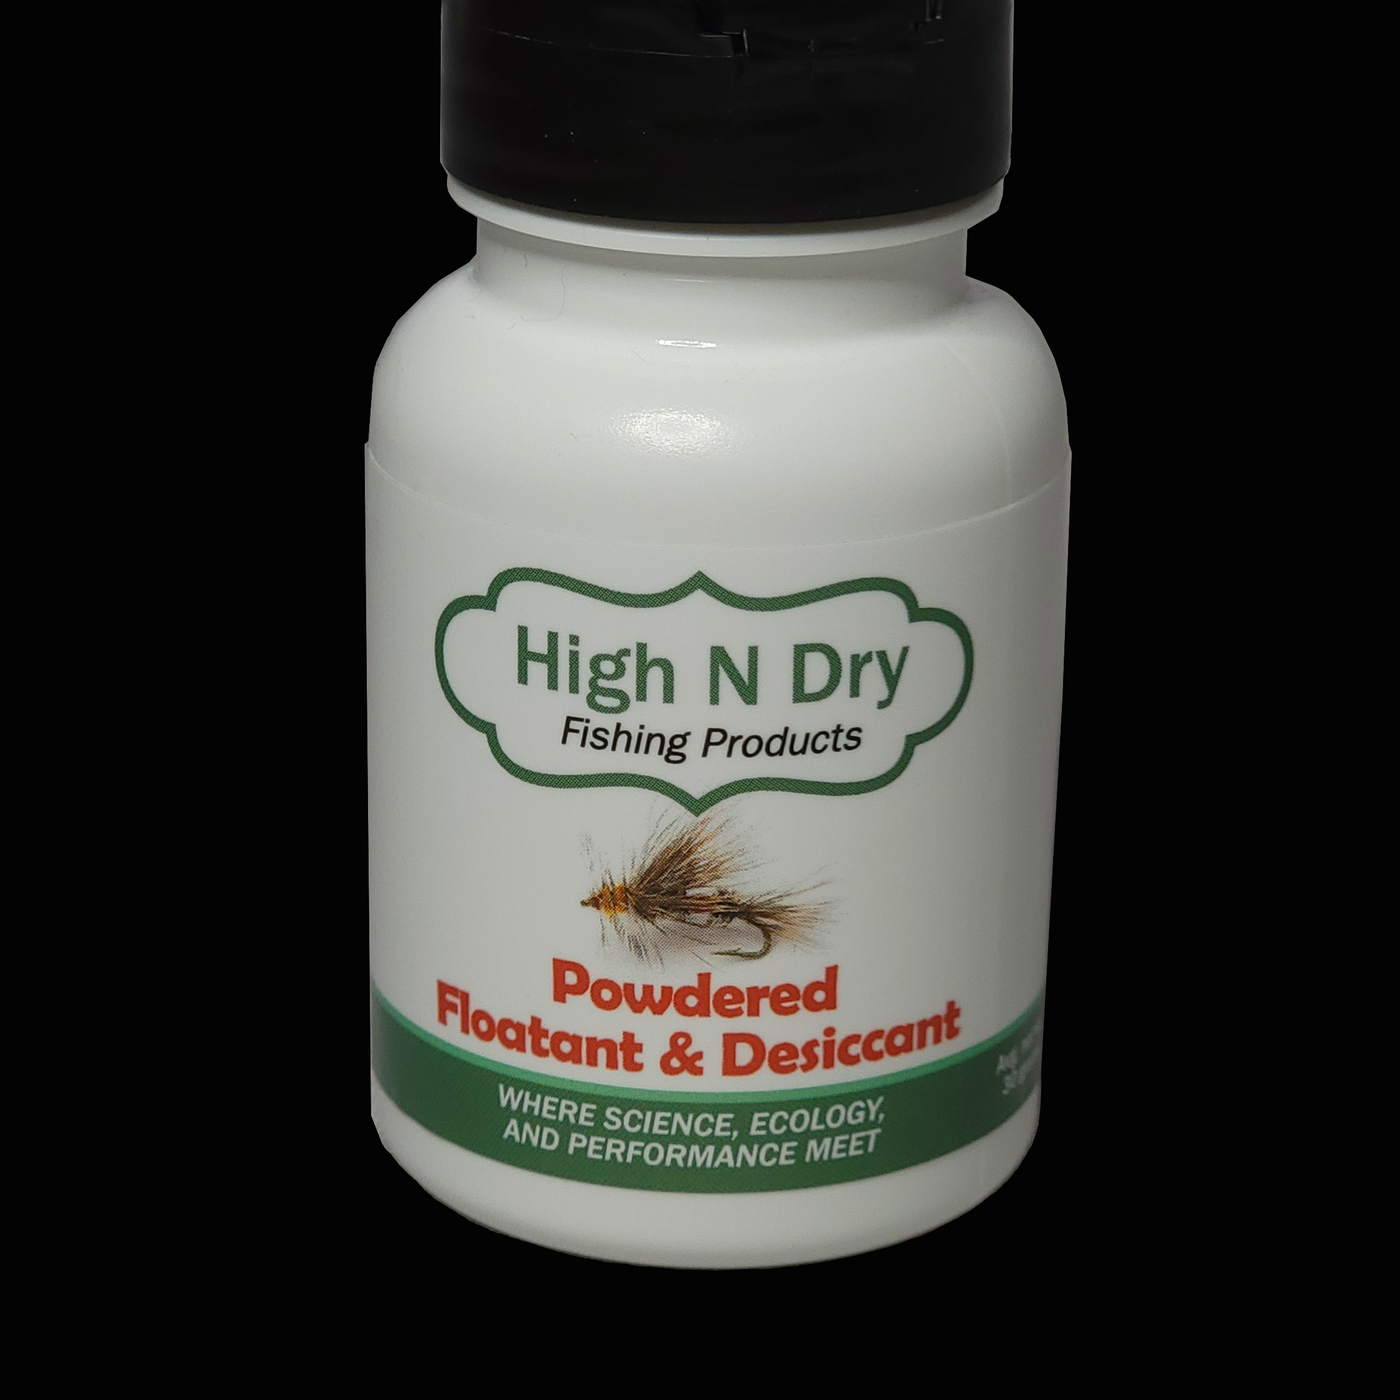 High N Dry Powdered Floatant & Desiccant - Conejos River Anglers